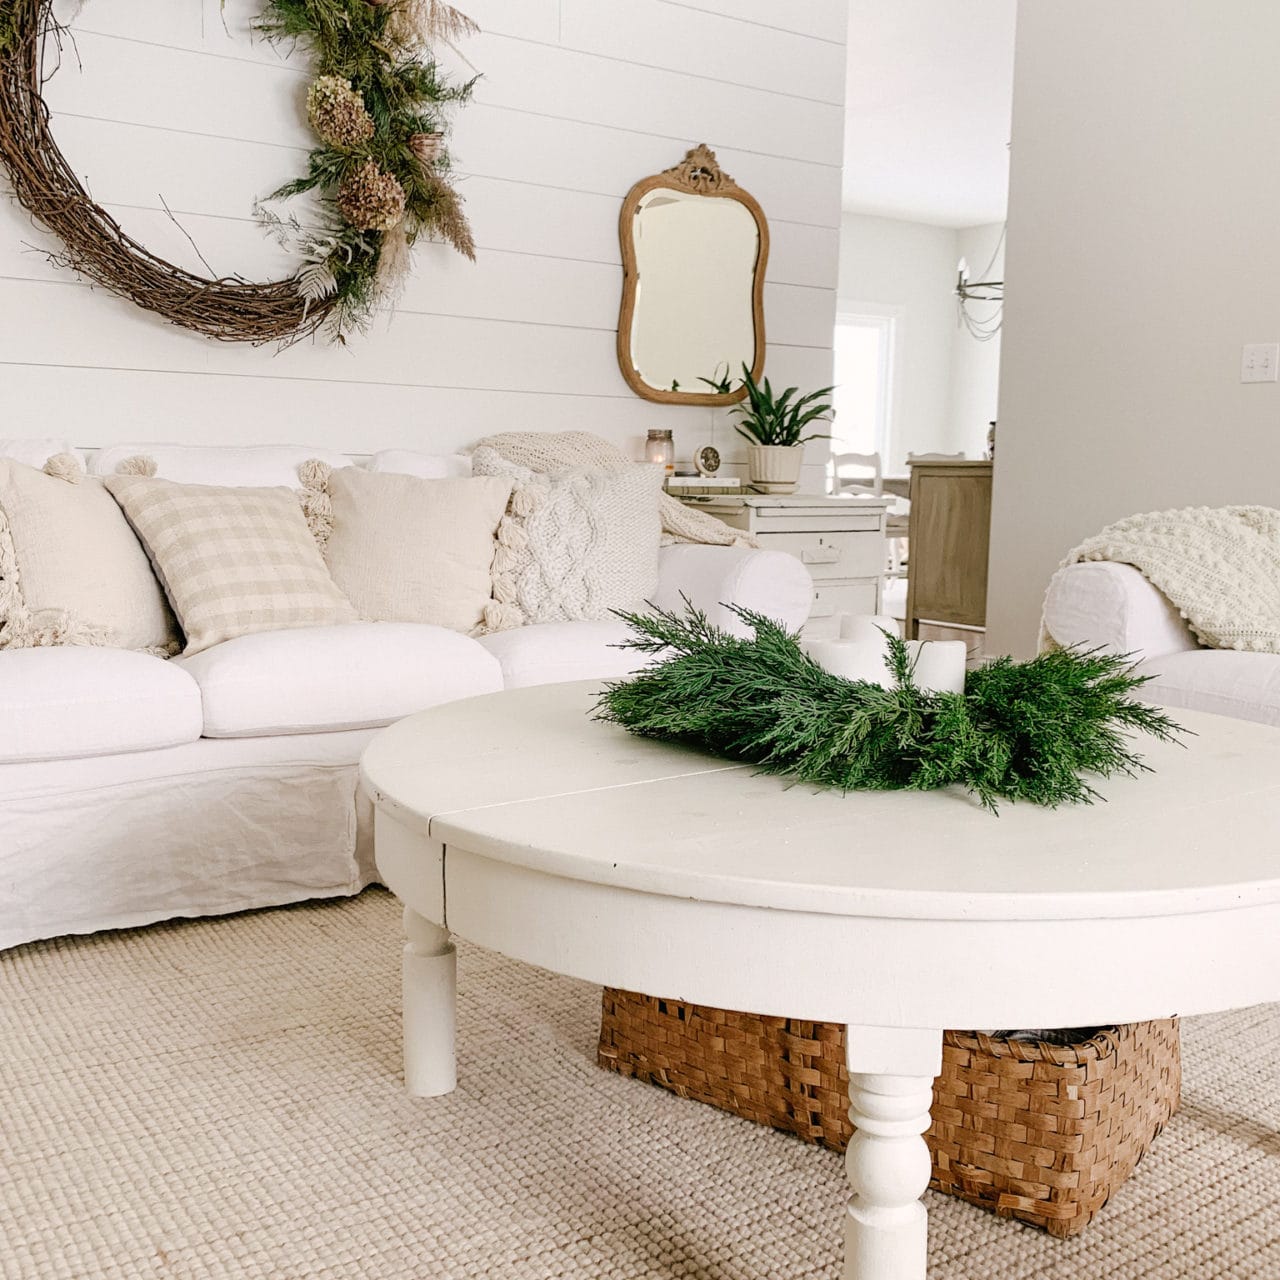 Making Your Home Feel Cozy All Winter Long